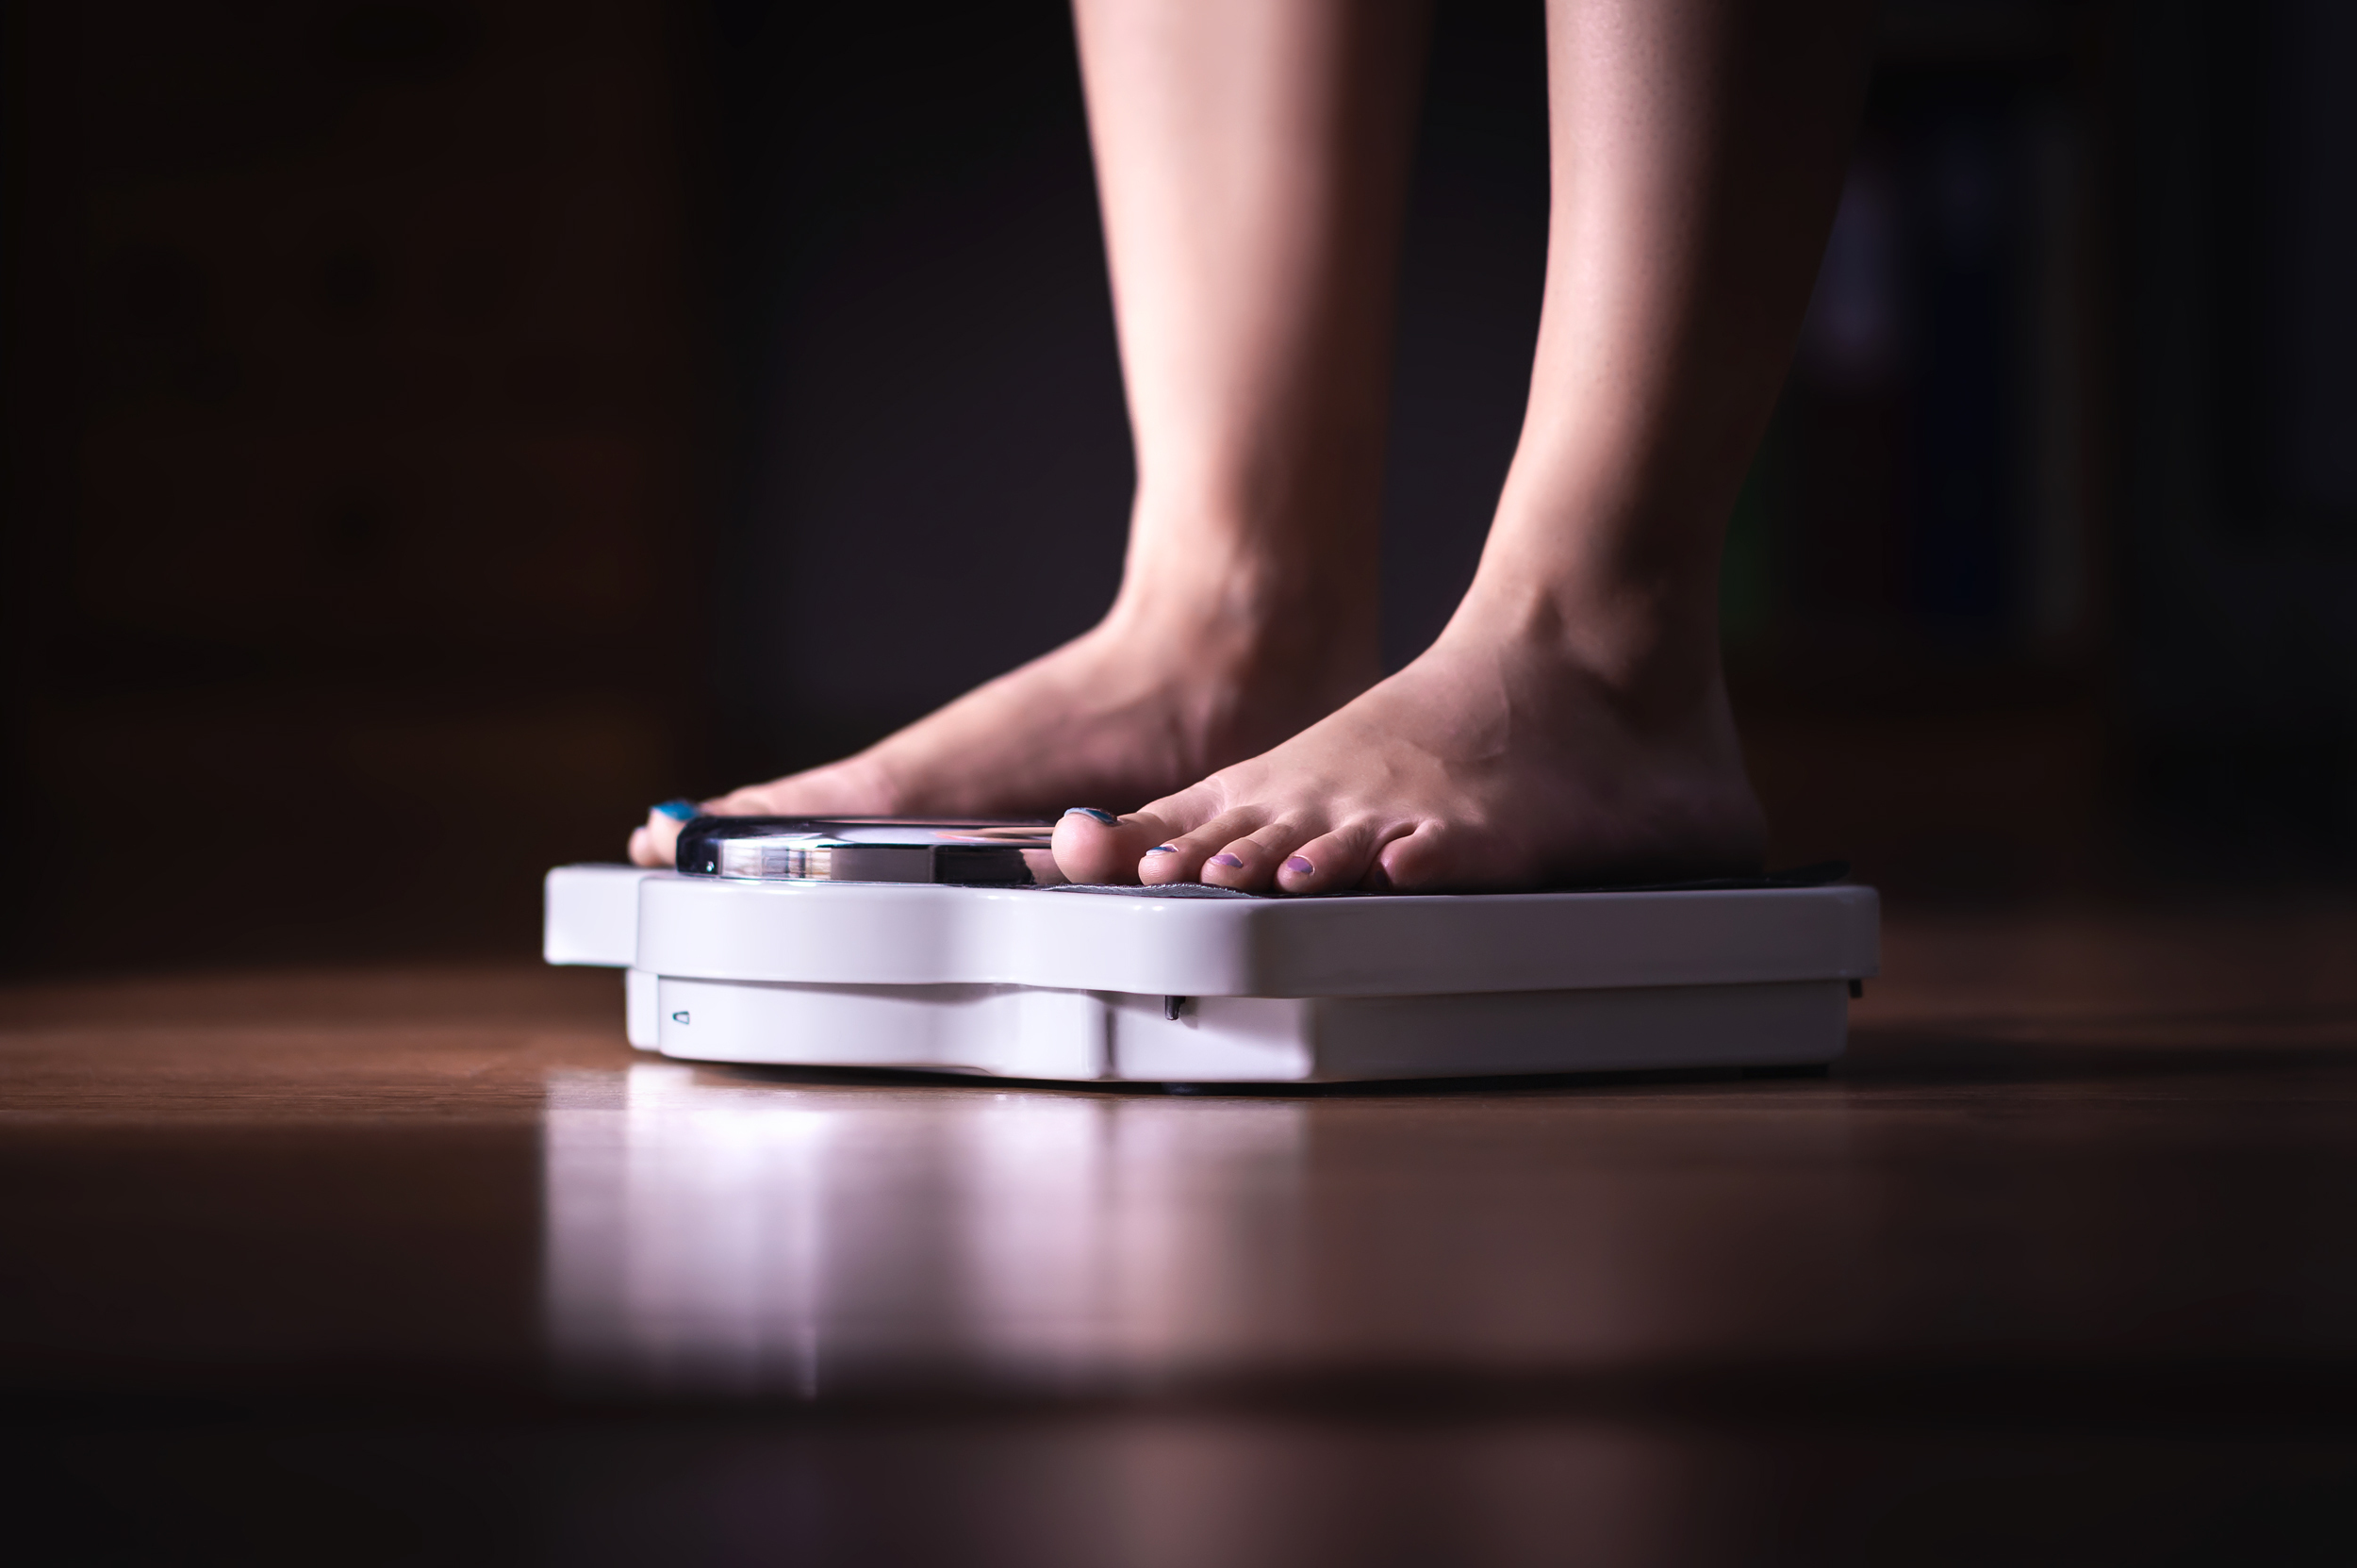 feet on scale. weight loss and diet concept. woman weighing hers